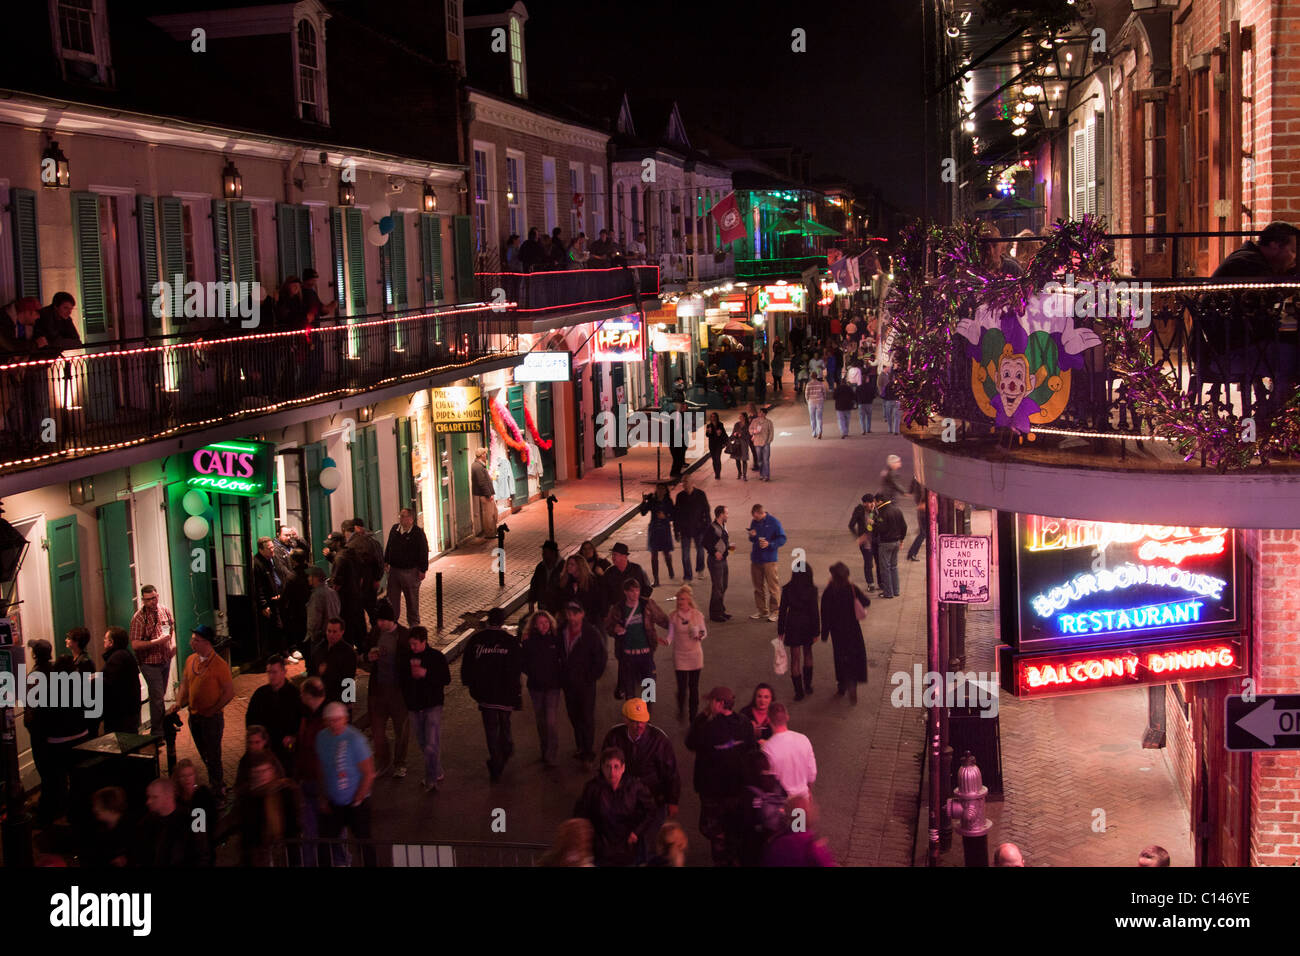 Aerial view of Bourbon Street in New Orleans, with people drinking and walking by neon signs for bars and clubs at night Stock Photo